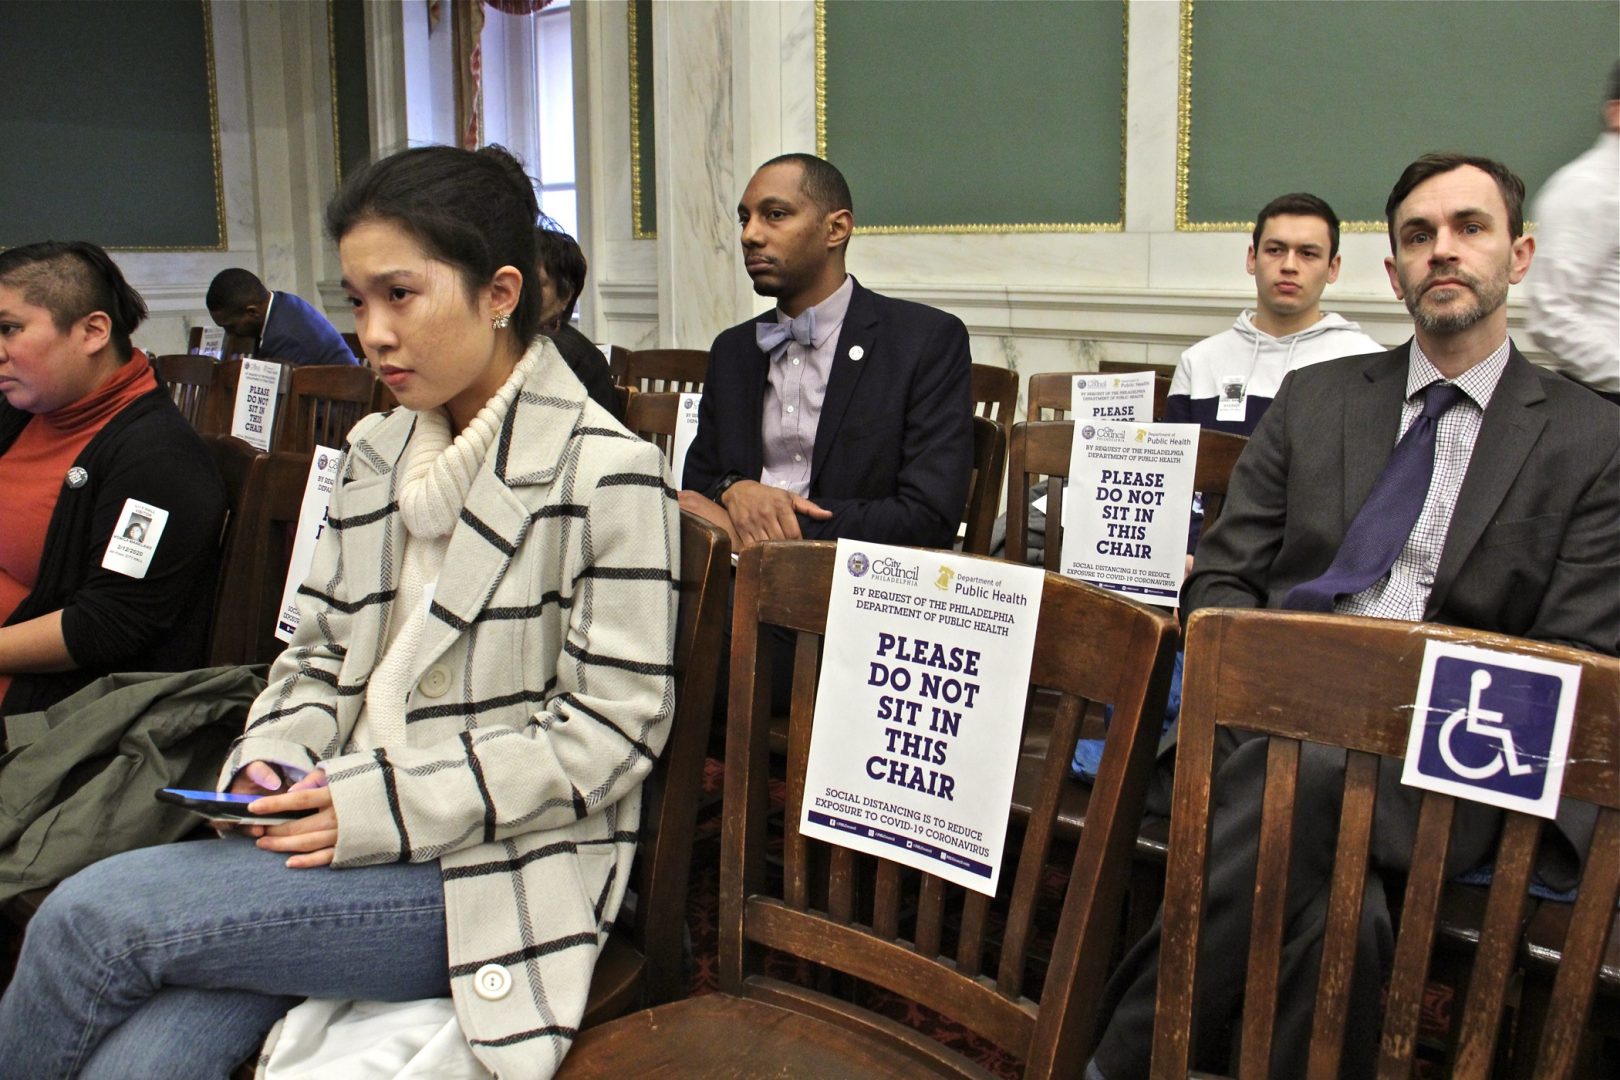 At Philadelphia City Council meeting, attendees were tod to use every other chair to reduce the chances of exposure to coronavirus. (Emma Lee/WHYY)